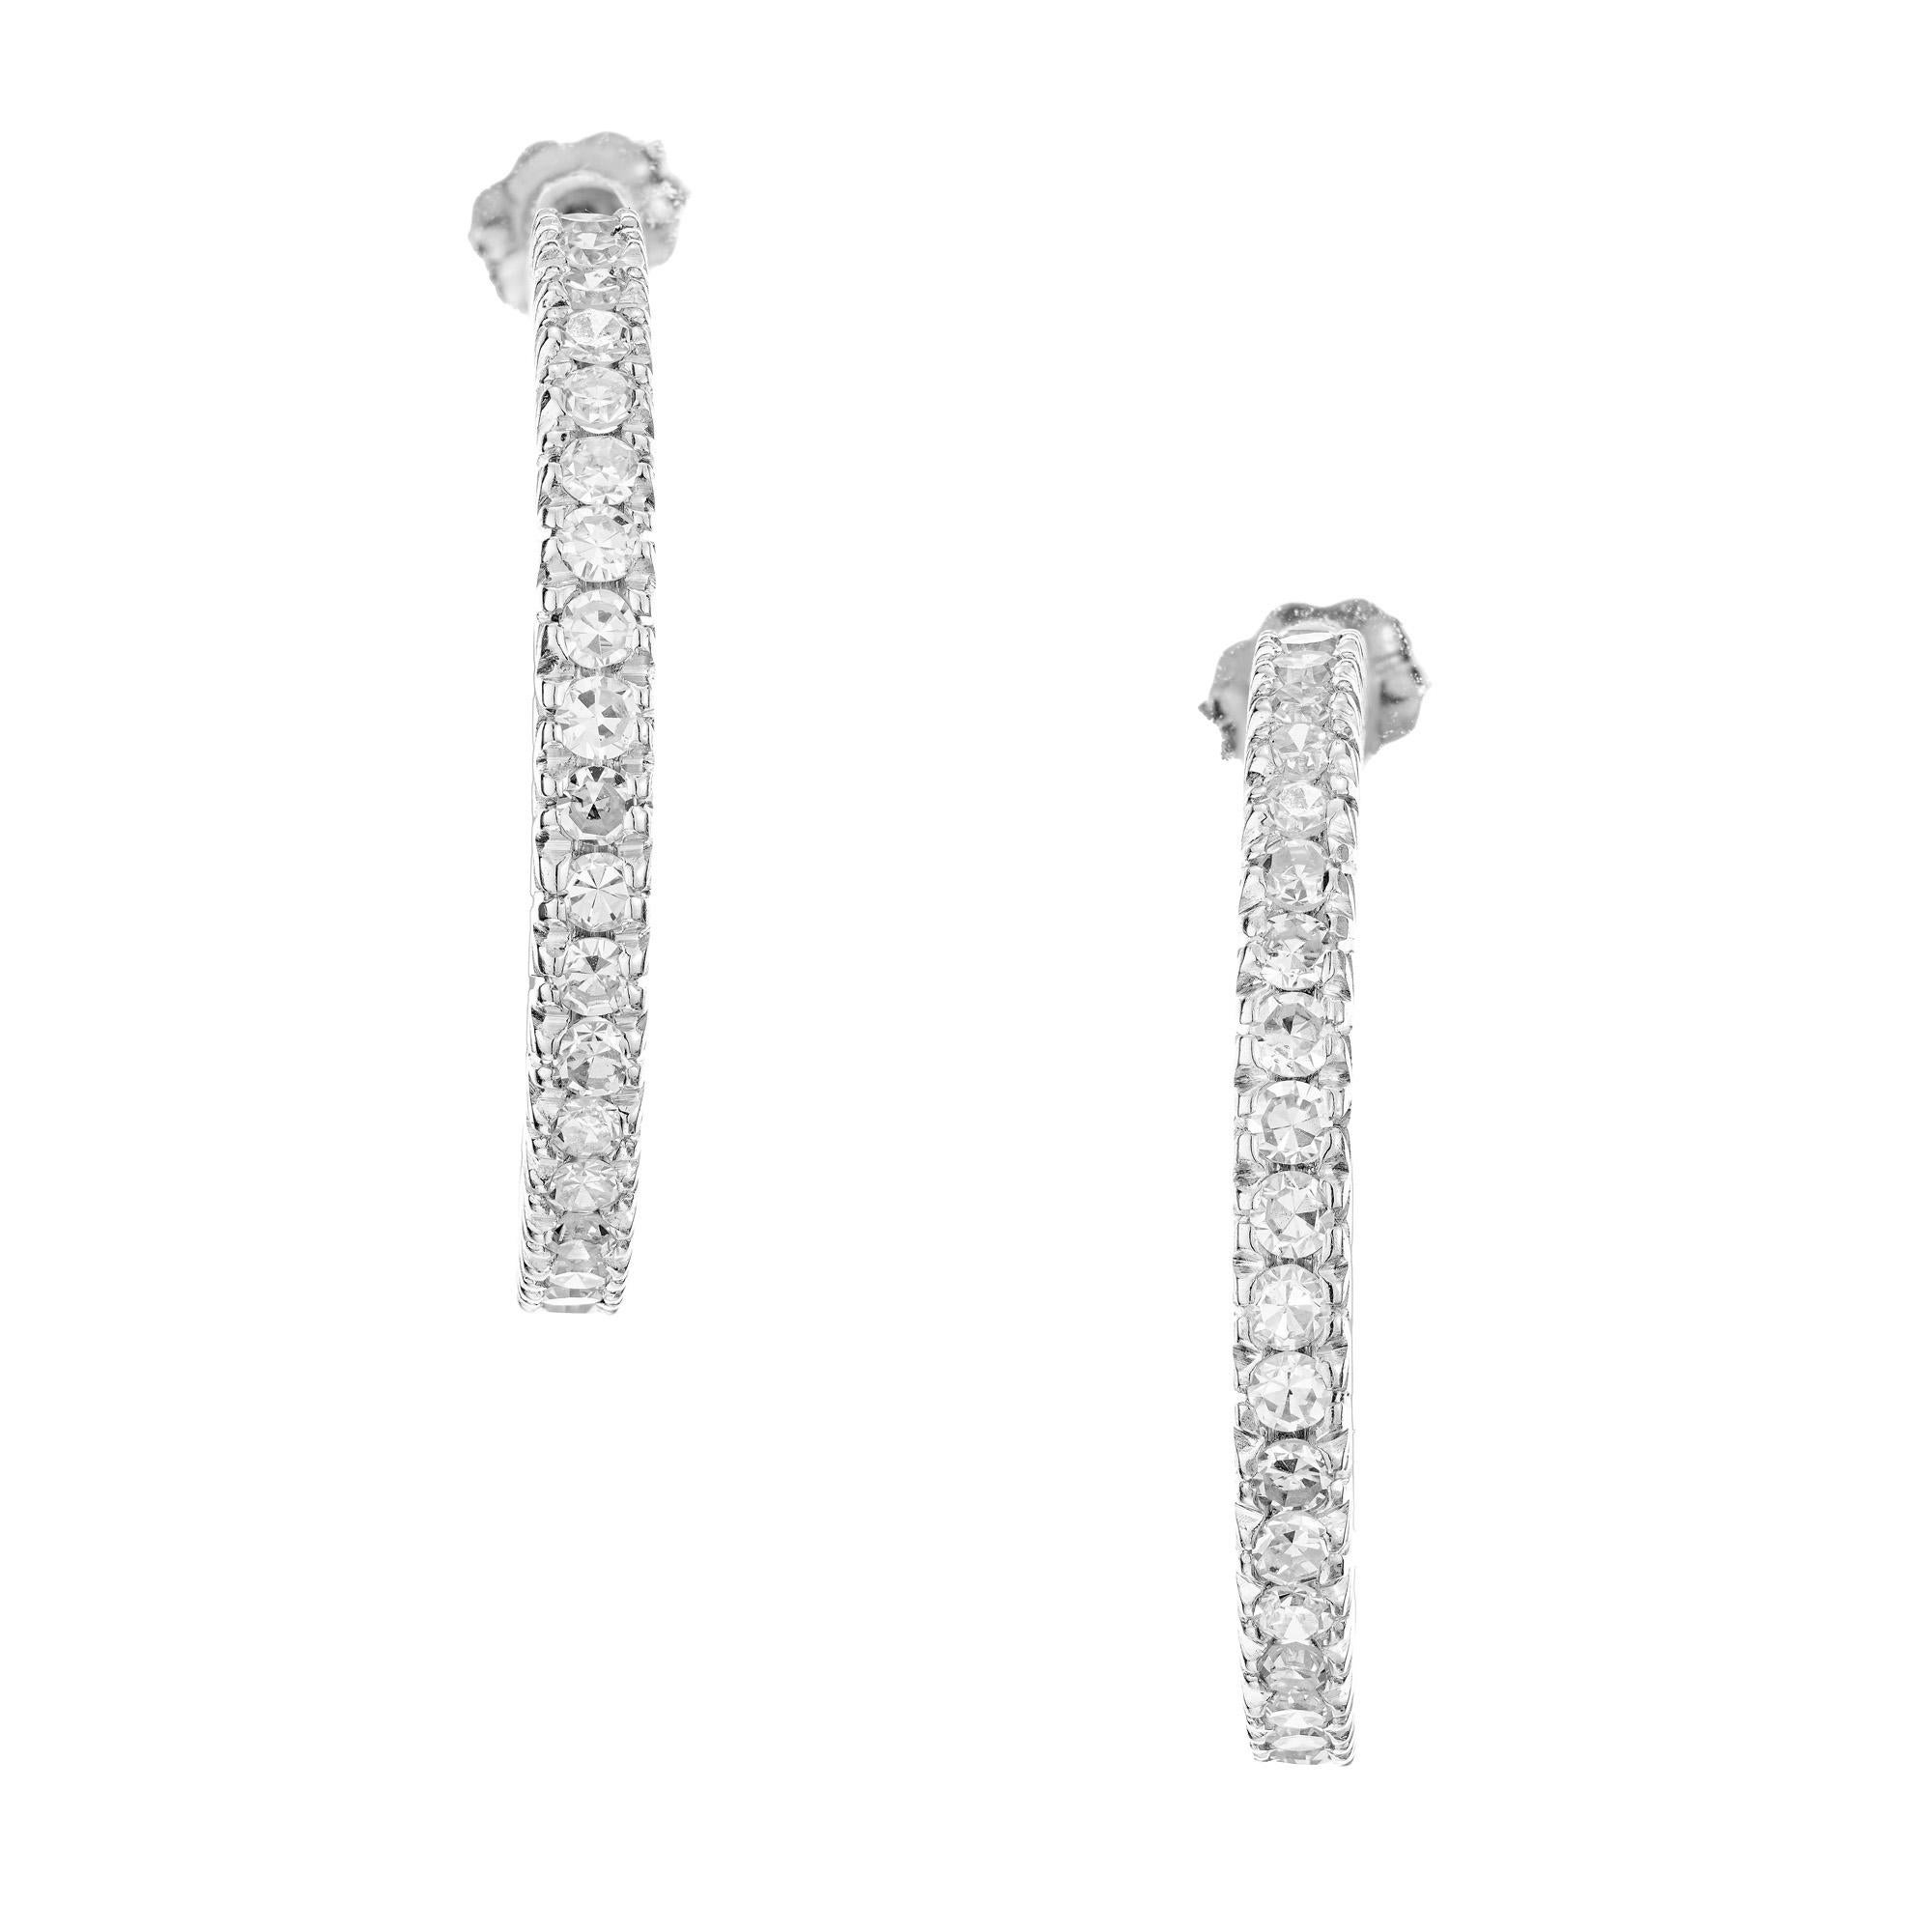 1960's Diamond Platinum hoop earrings. Each hoop is encrusted with 31 brilliant round-cut diamonds, totaling 1.50 carats, creating a stunning sparkle. The platinum setting adds a touch of elegance and durability to these earrings, The classic hoop